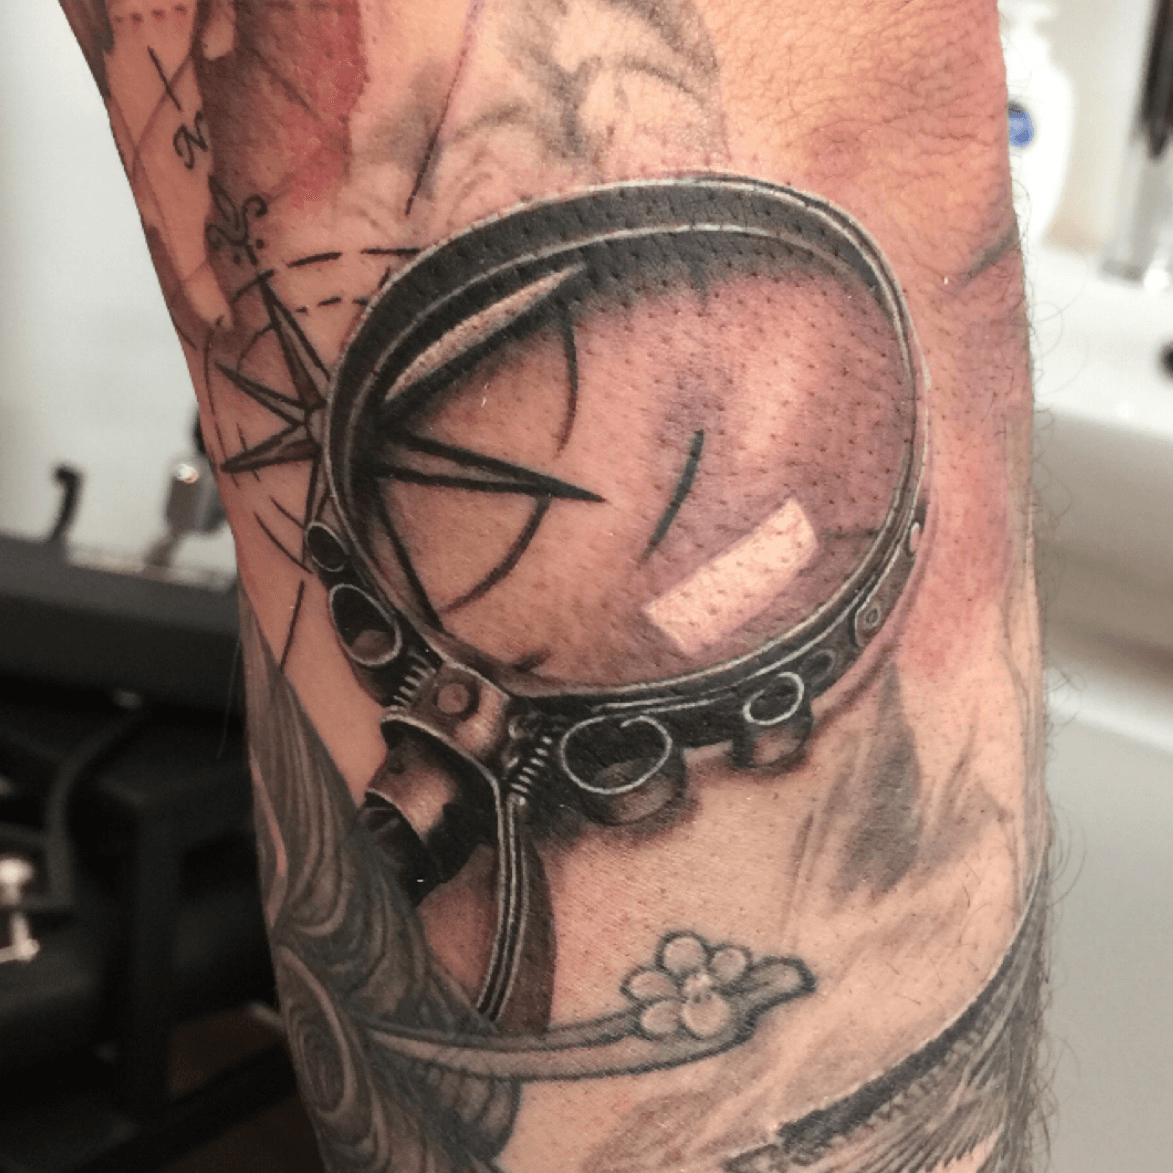 magnifyingglass in Tattoos  Search in 13M Tattoos Now  Tattoodo